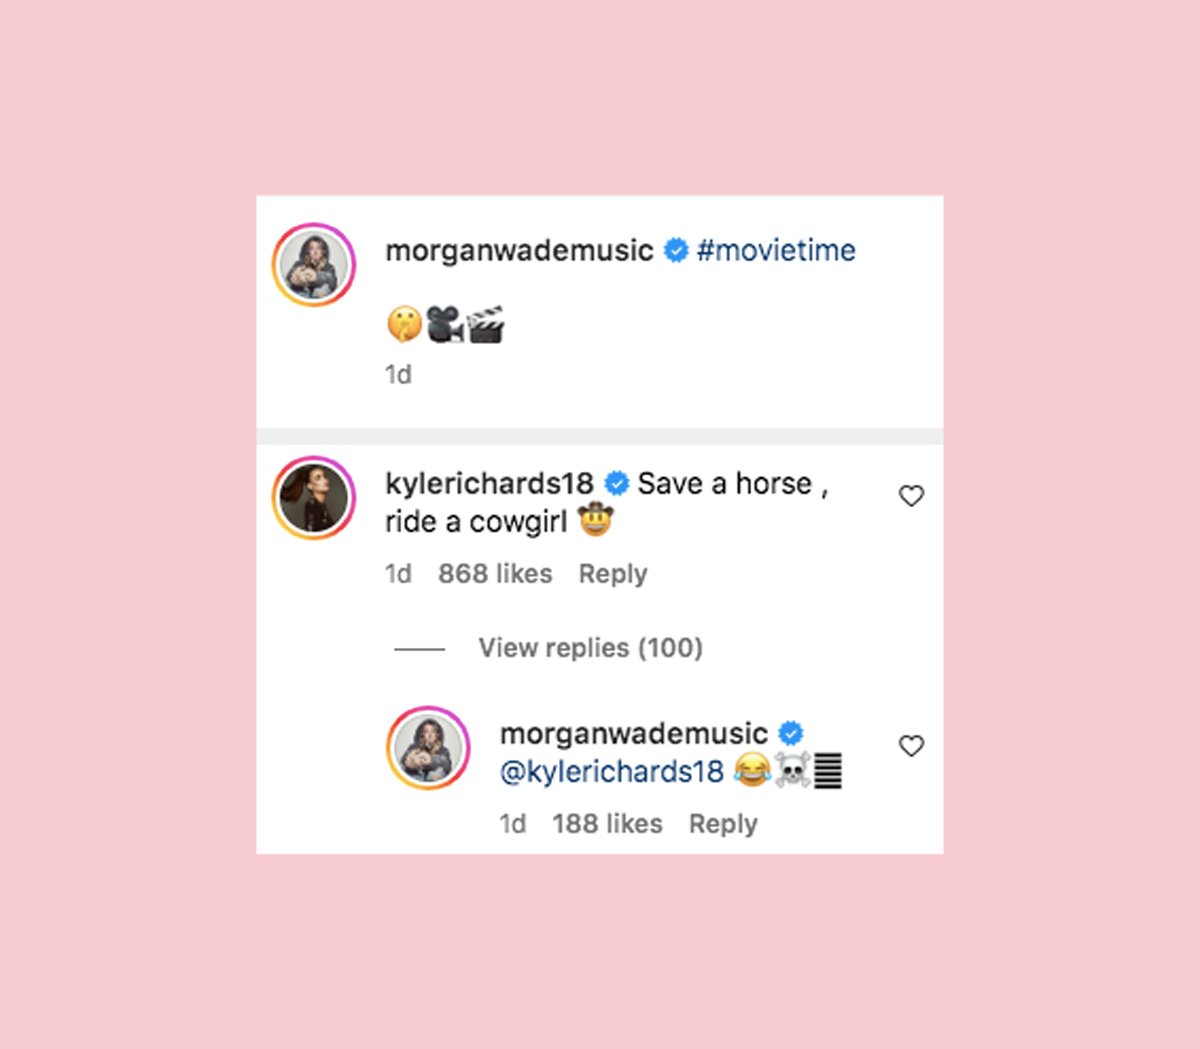 Kyle Richards Leaves This Super Flirty Comment On Morgan Wade’s Video Amid Romance Rumors! 